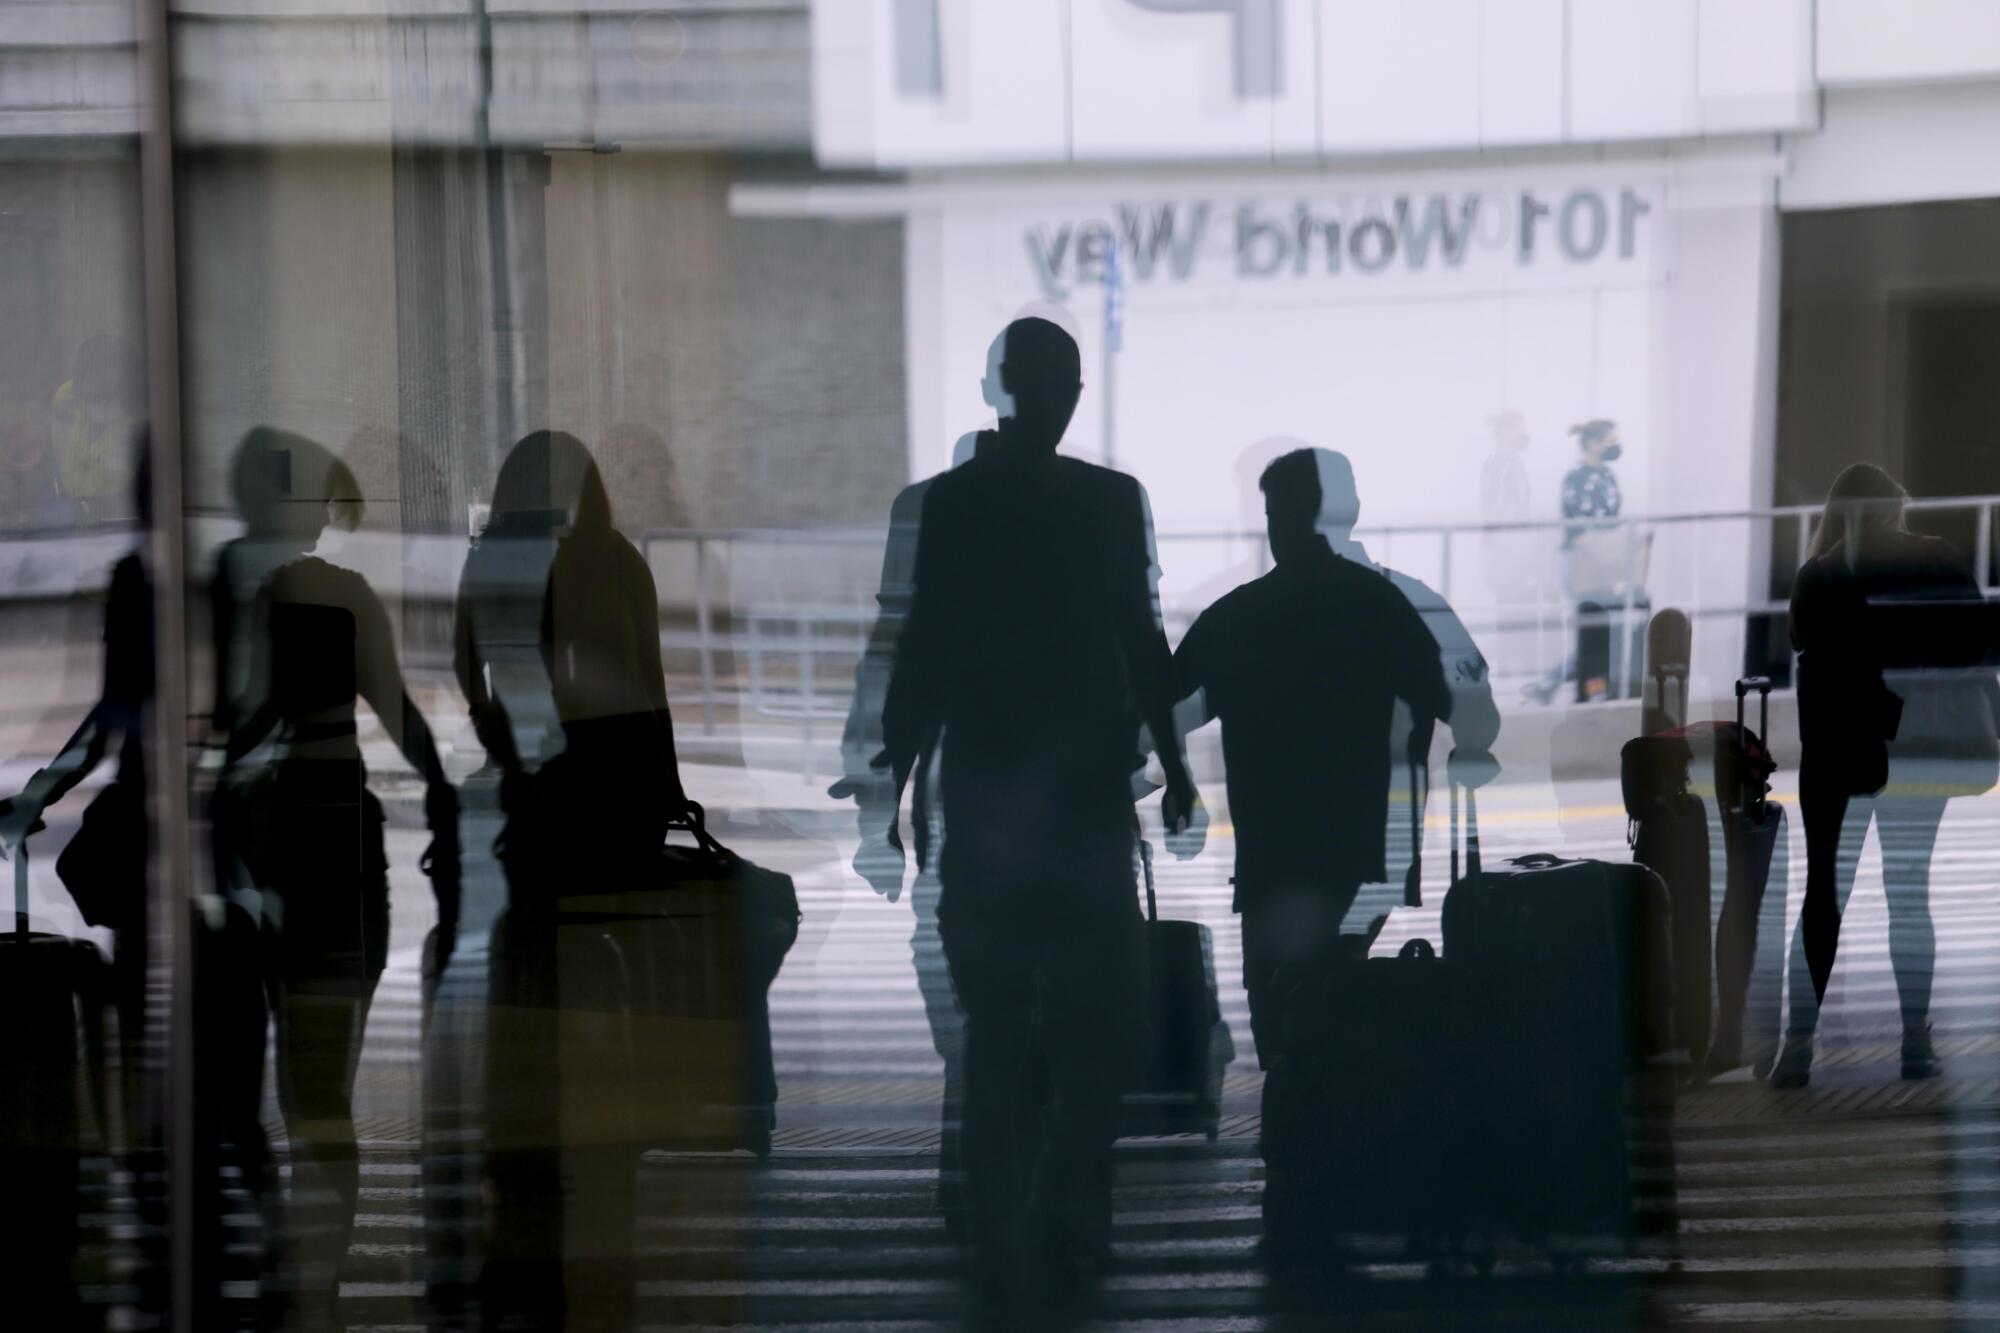 Travelers, caught in a reflection, begin their Memorial Day holiday getaway at the Los Angeles International Airport.